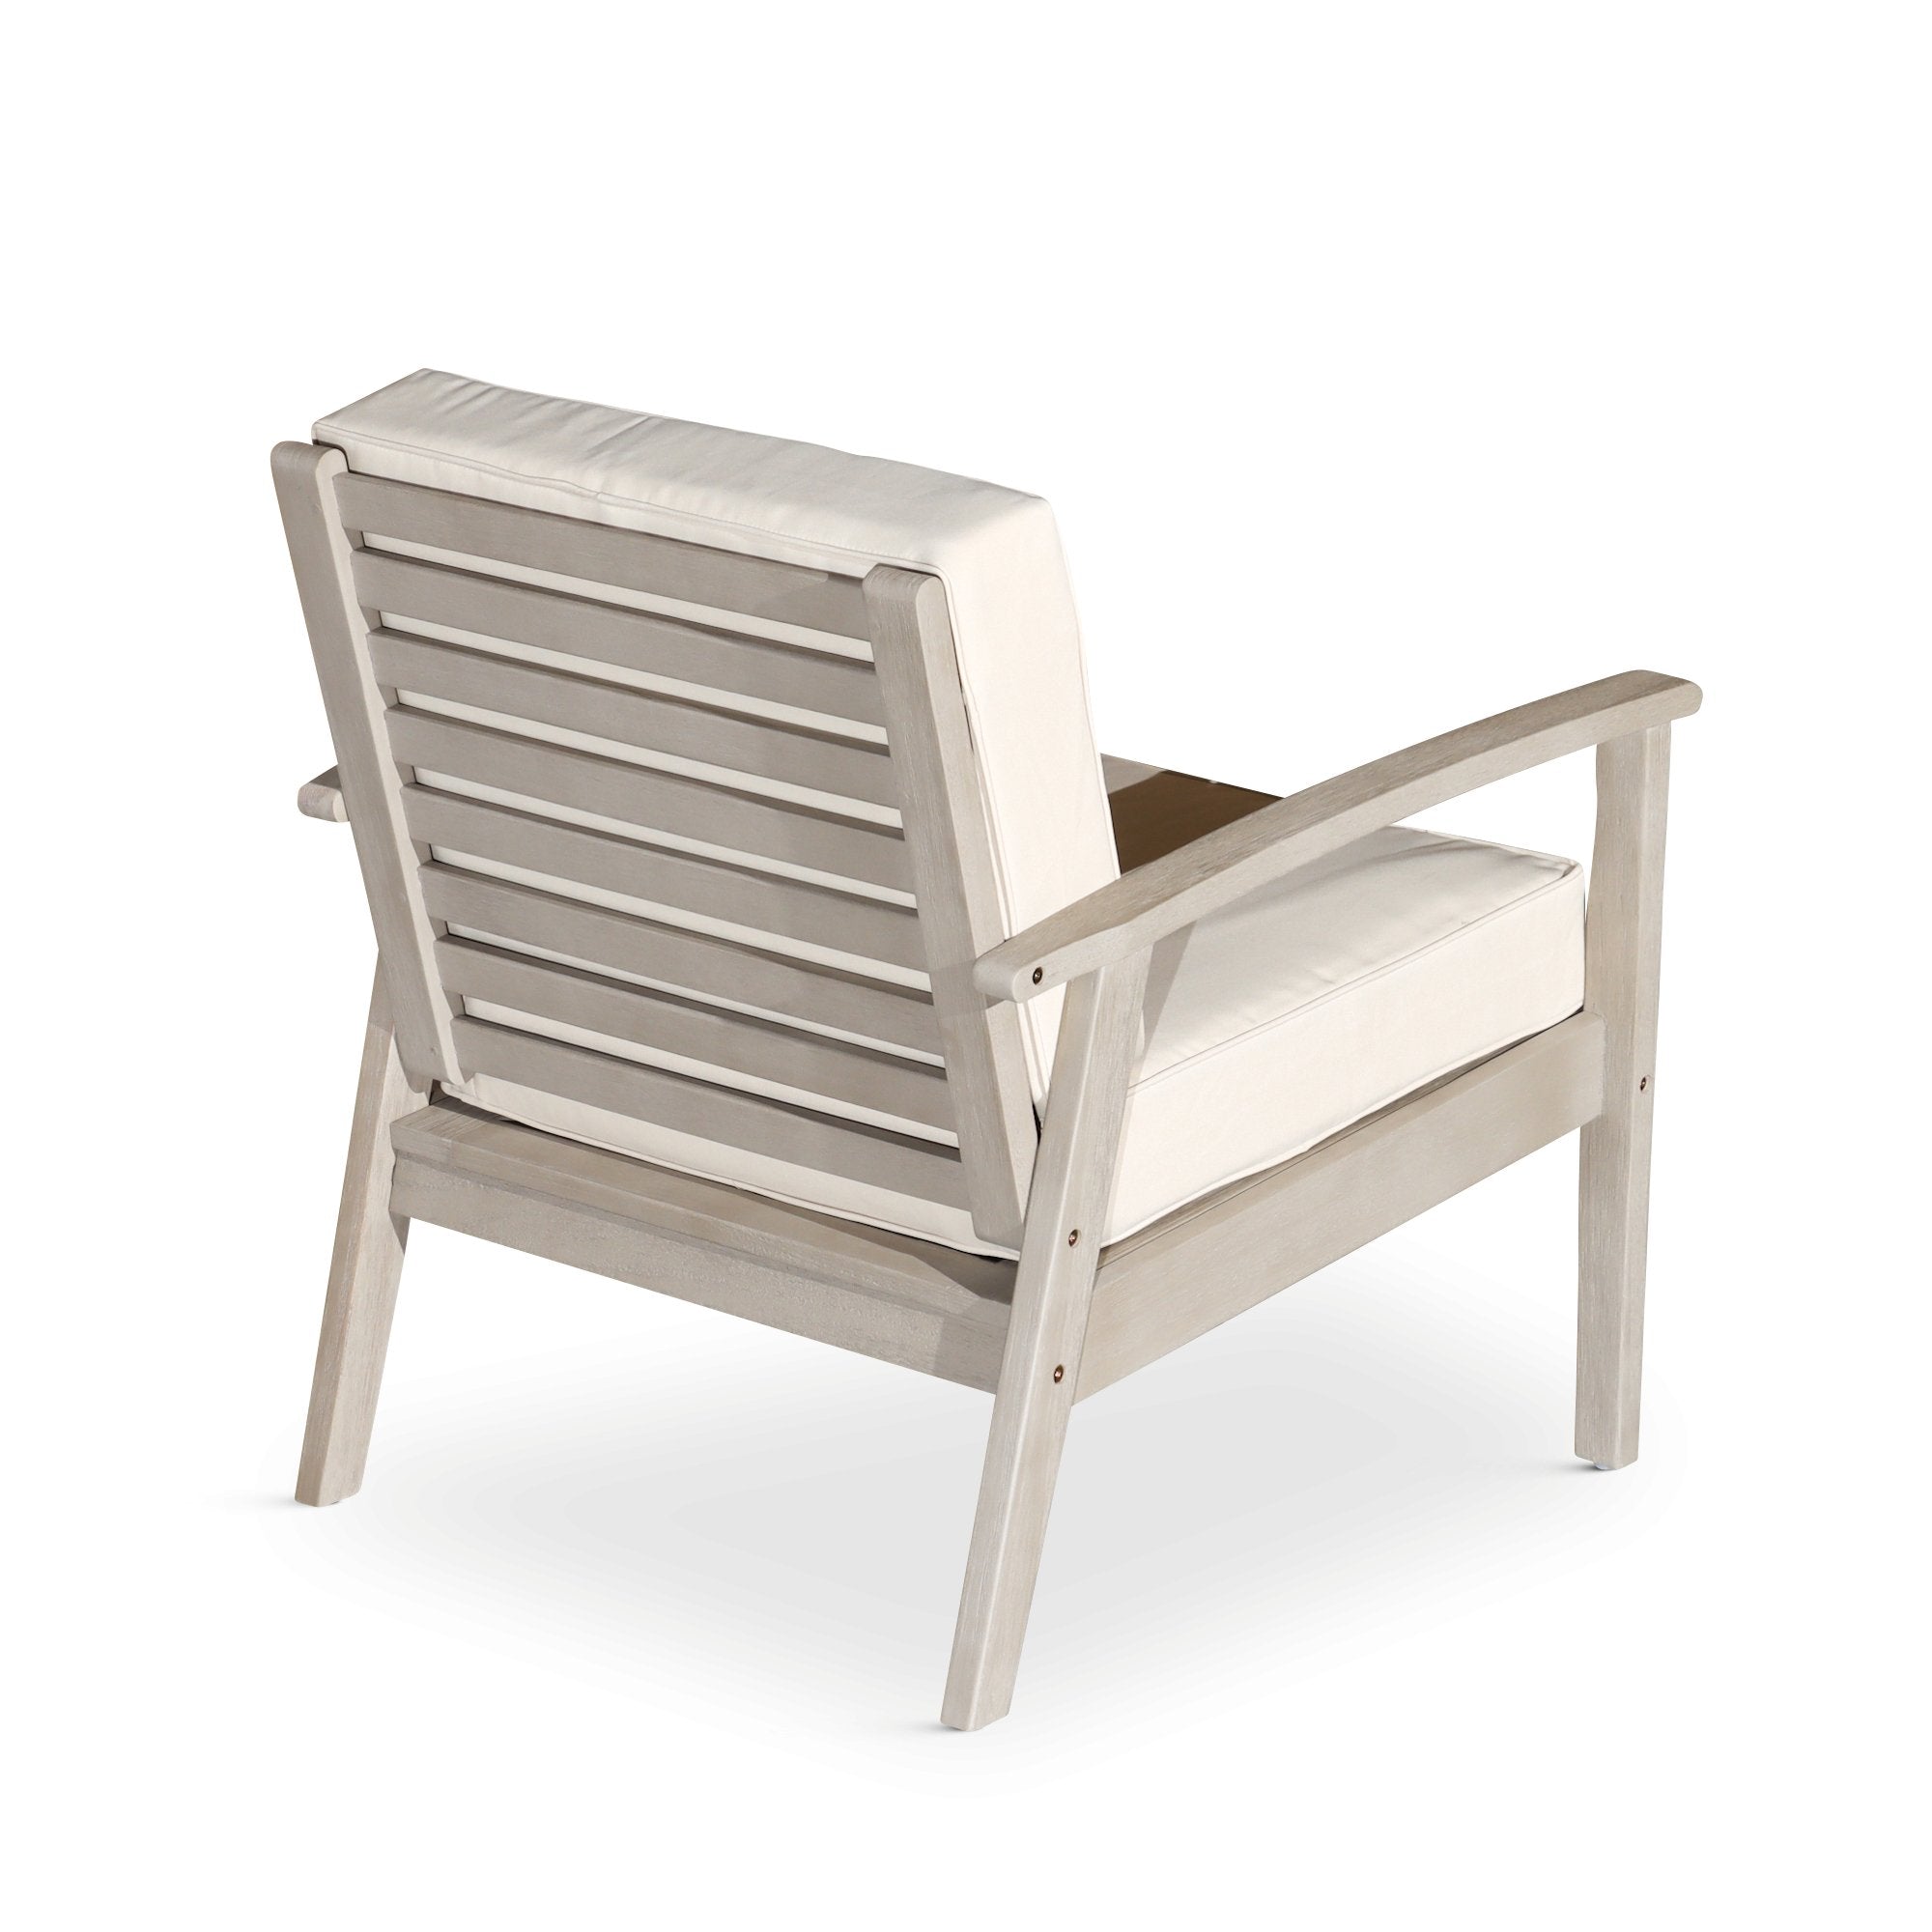 Deep Seat Outdoor Chair, Driftwood Gray Finish, Navy Cushions - Tuesday Morning-Chairs & Seating